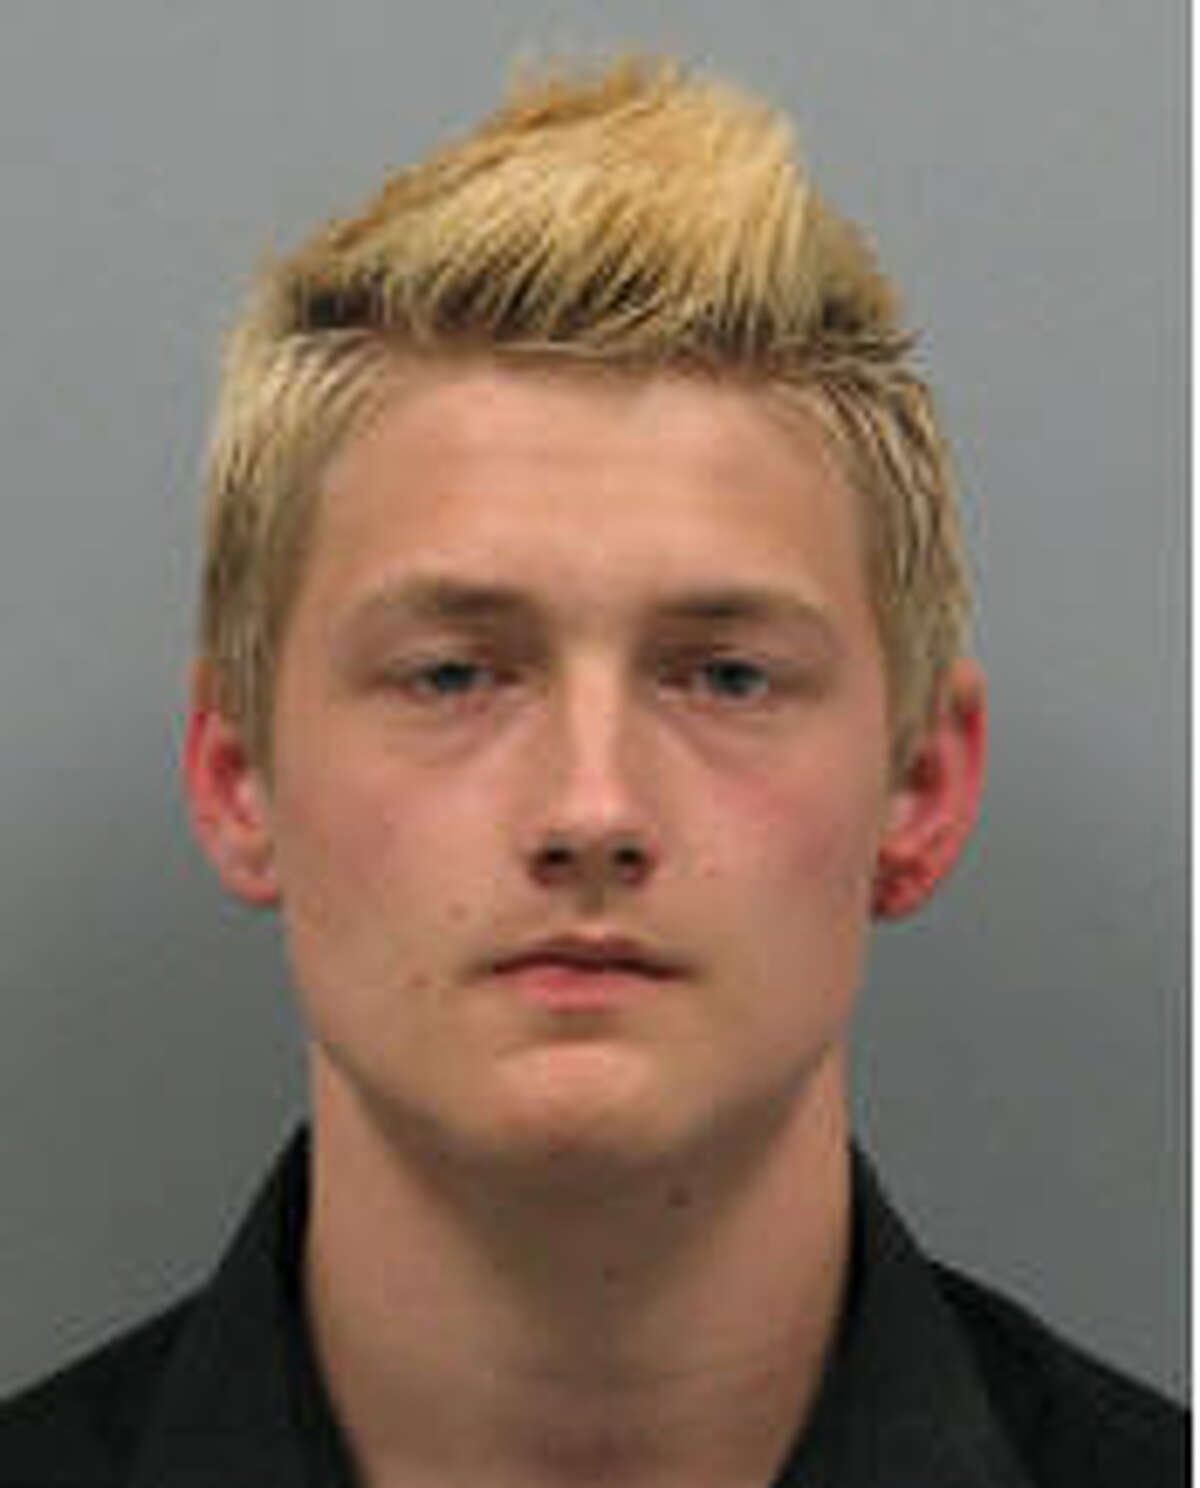 Daniel James Furstenfeld, 18, is charged with aggravated robbery with a deadly weapon after a robbery about 10 p.m. Friday, Oct. 14, 2016, at a home in the 18200 block of Arbormont in northwest Harris County. (Harris County Precinct 4 Constable's Office)